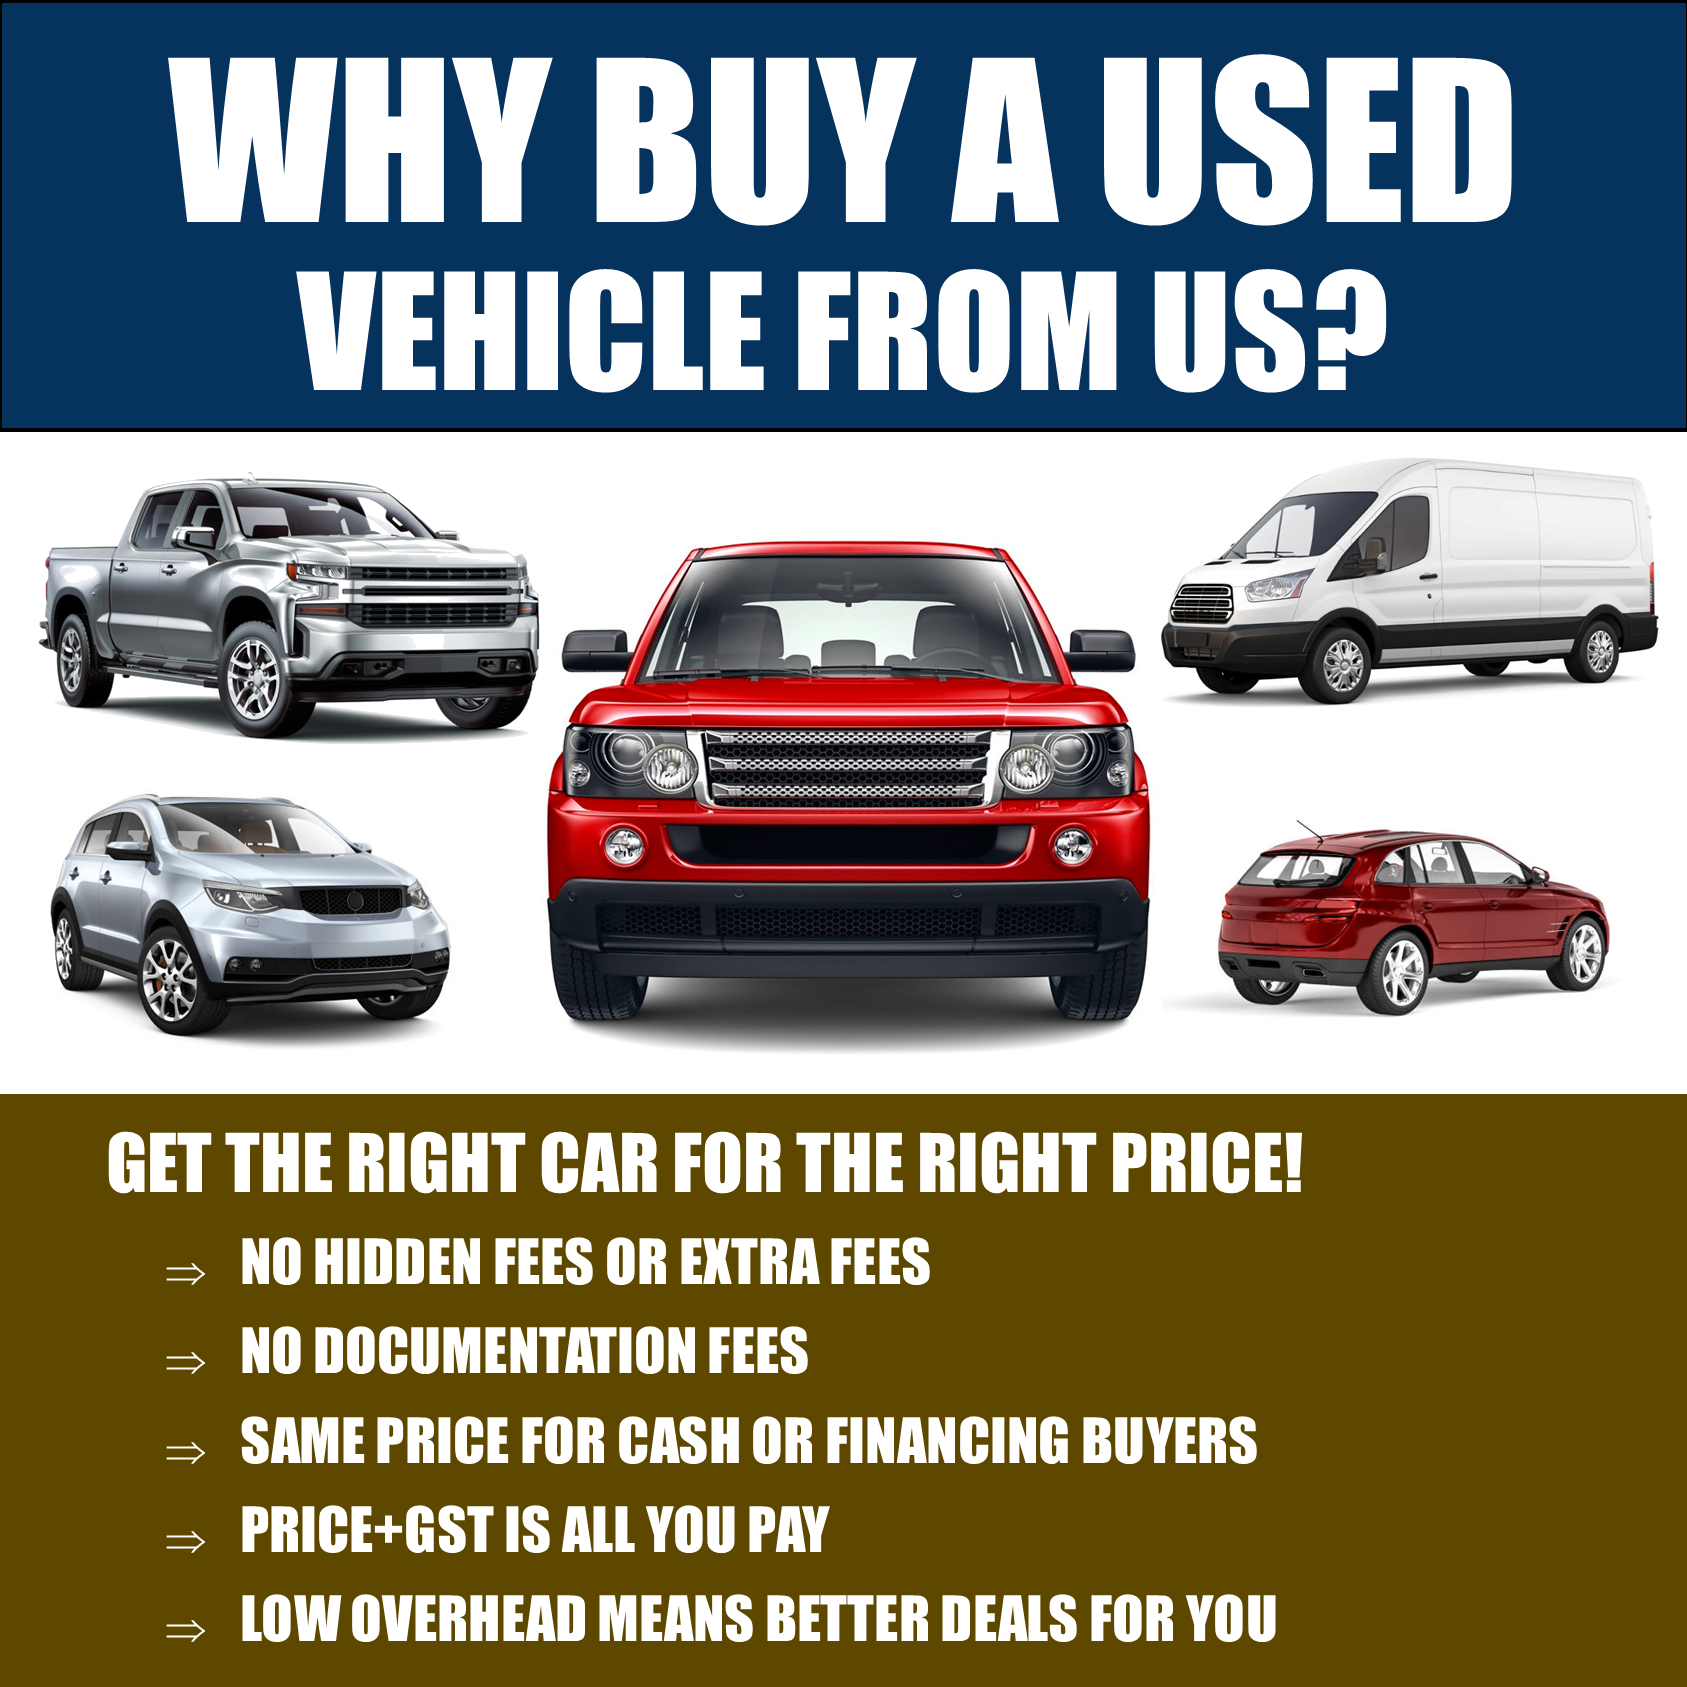 Why buy a used vehicle from us?